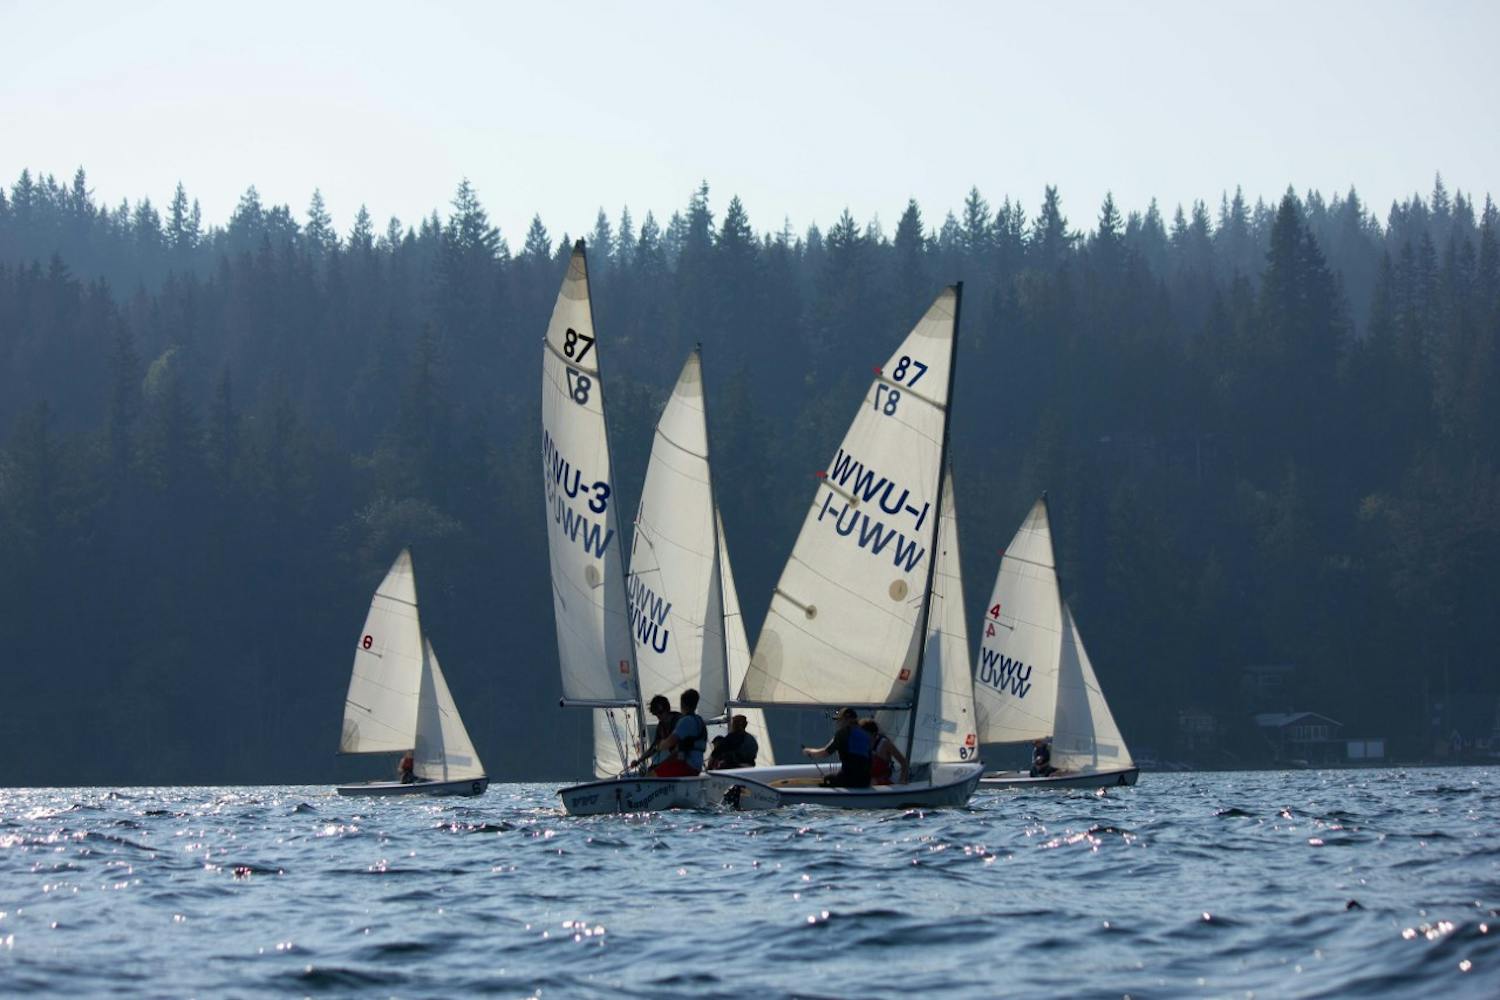 WWU’s student-run sailing team races against Stanford Gallery